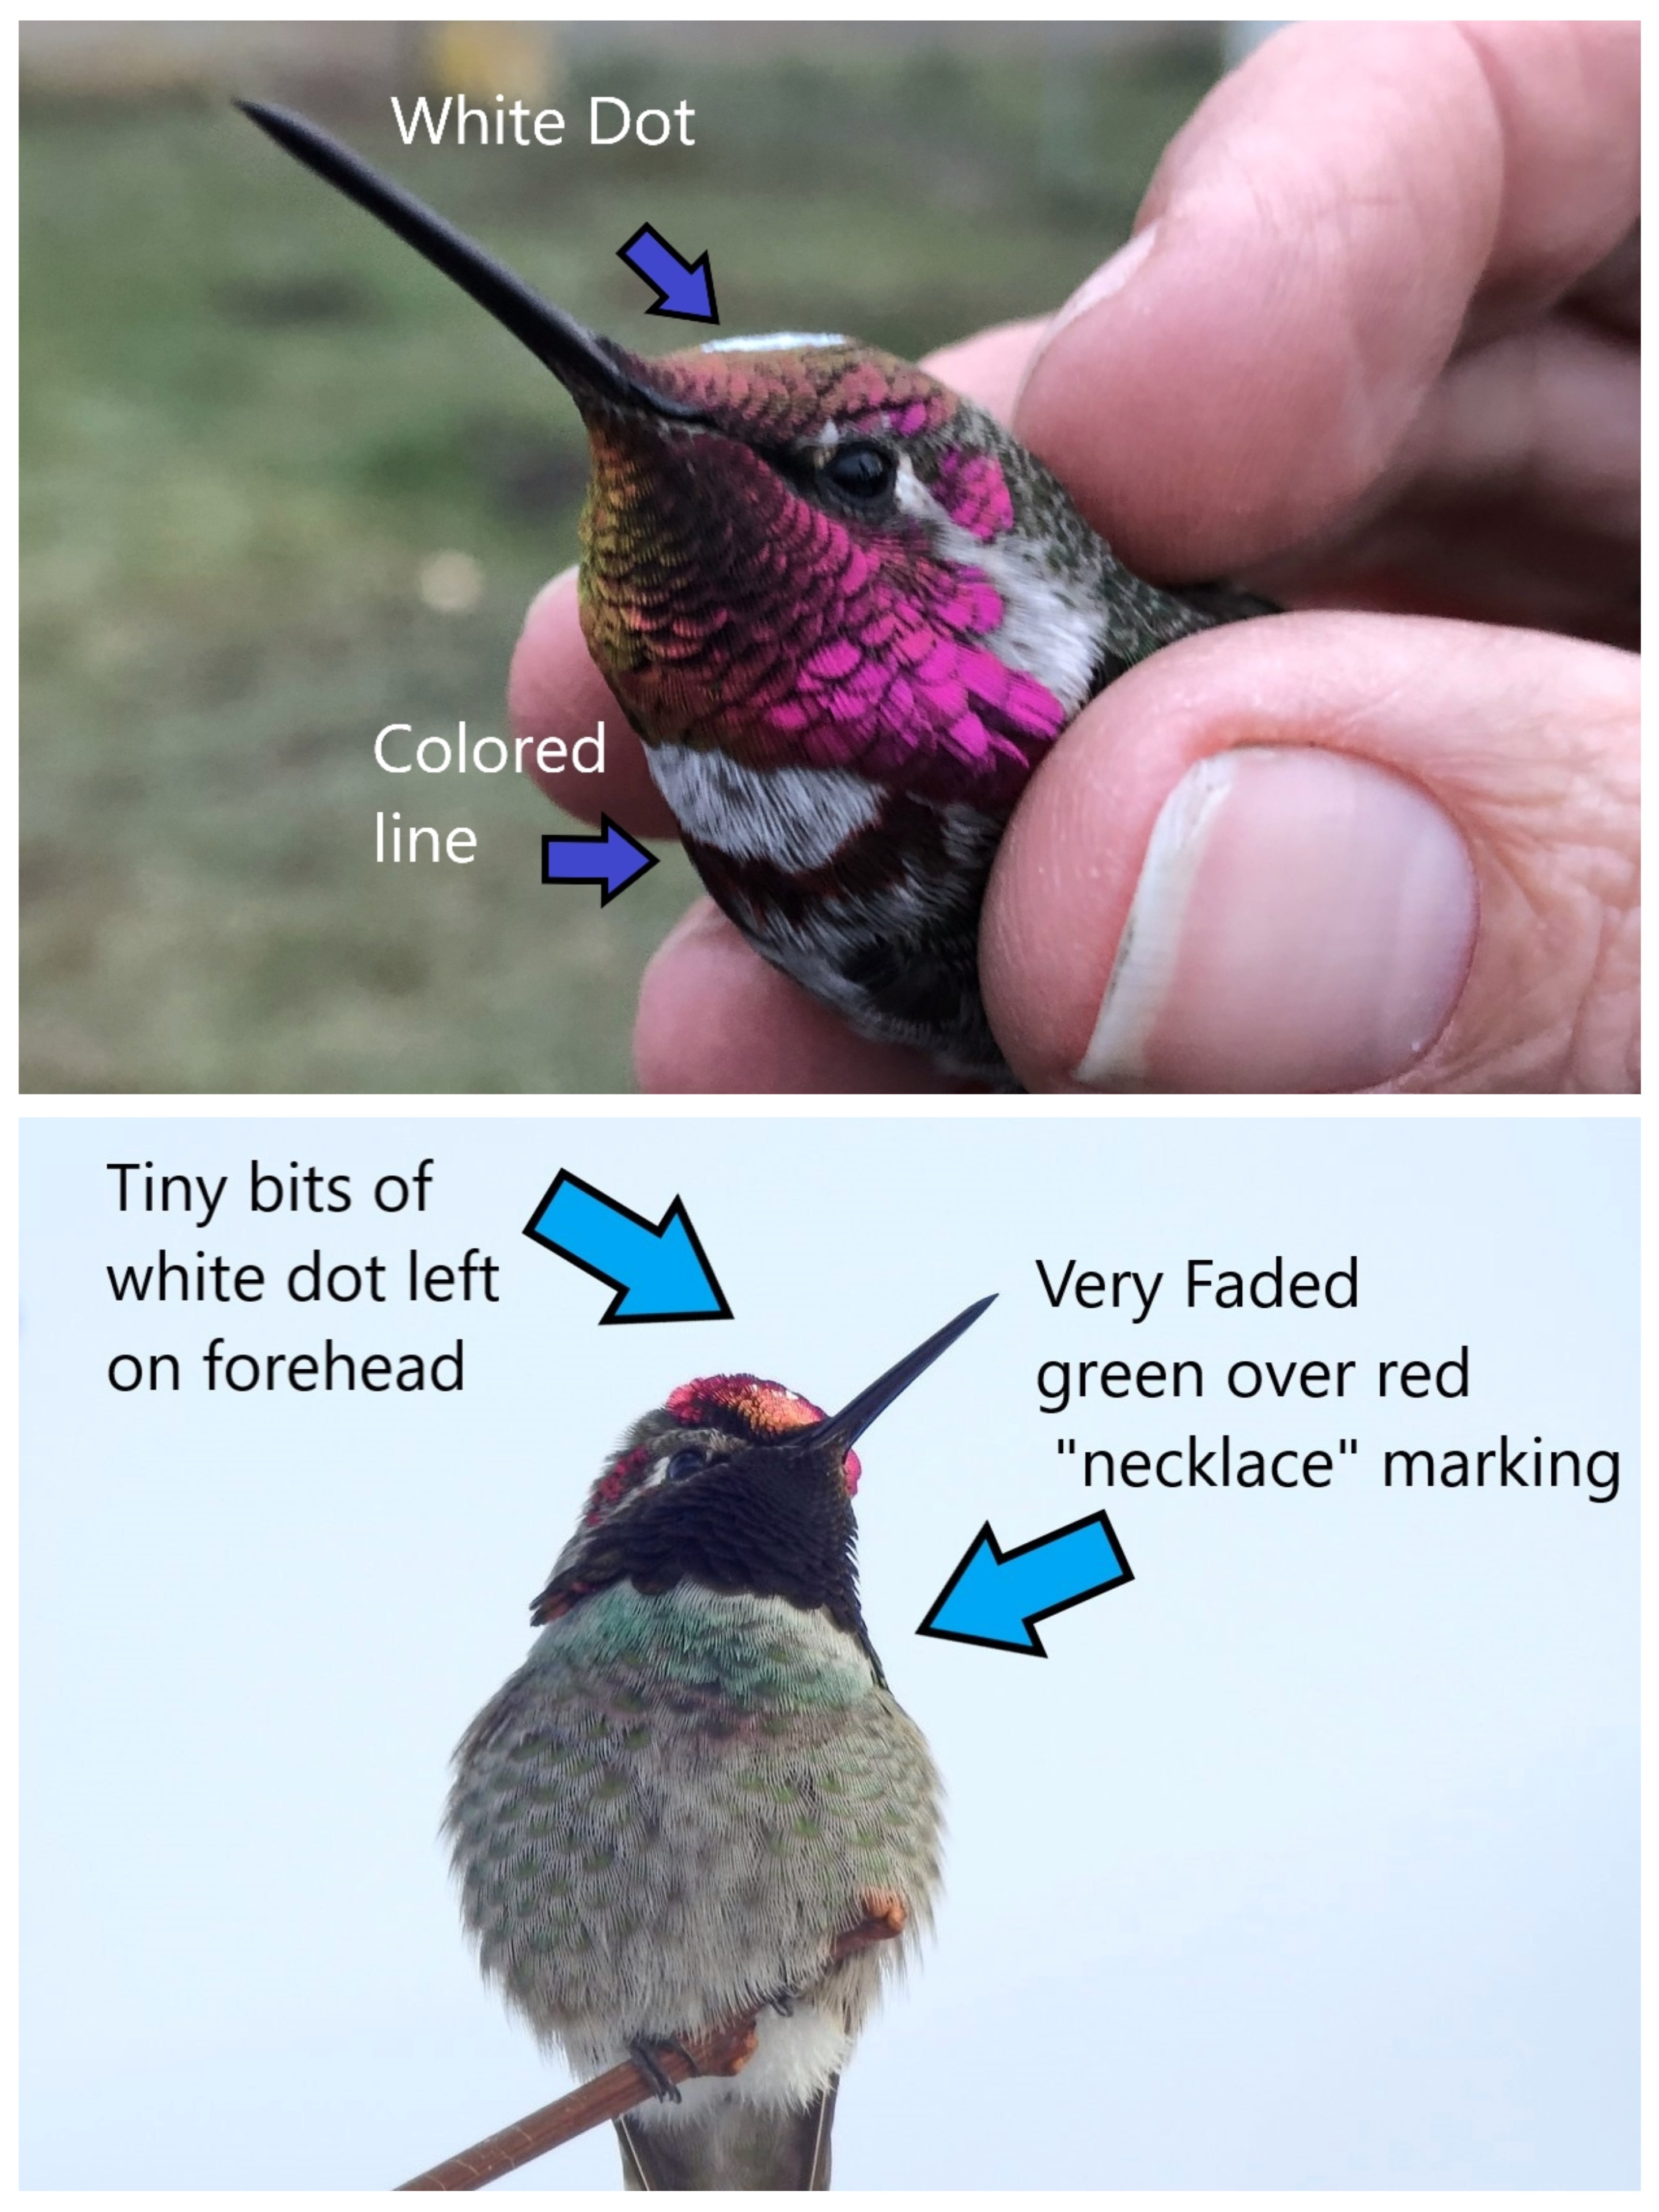 images show a hummingbird with a colored ink spot on its upper chest and a white dot on its crown. arrows and text point out and label these markings